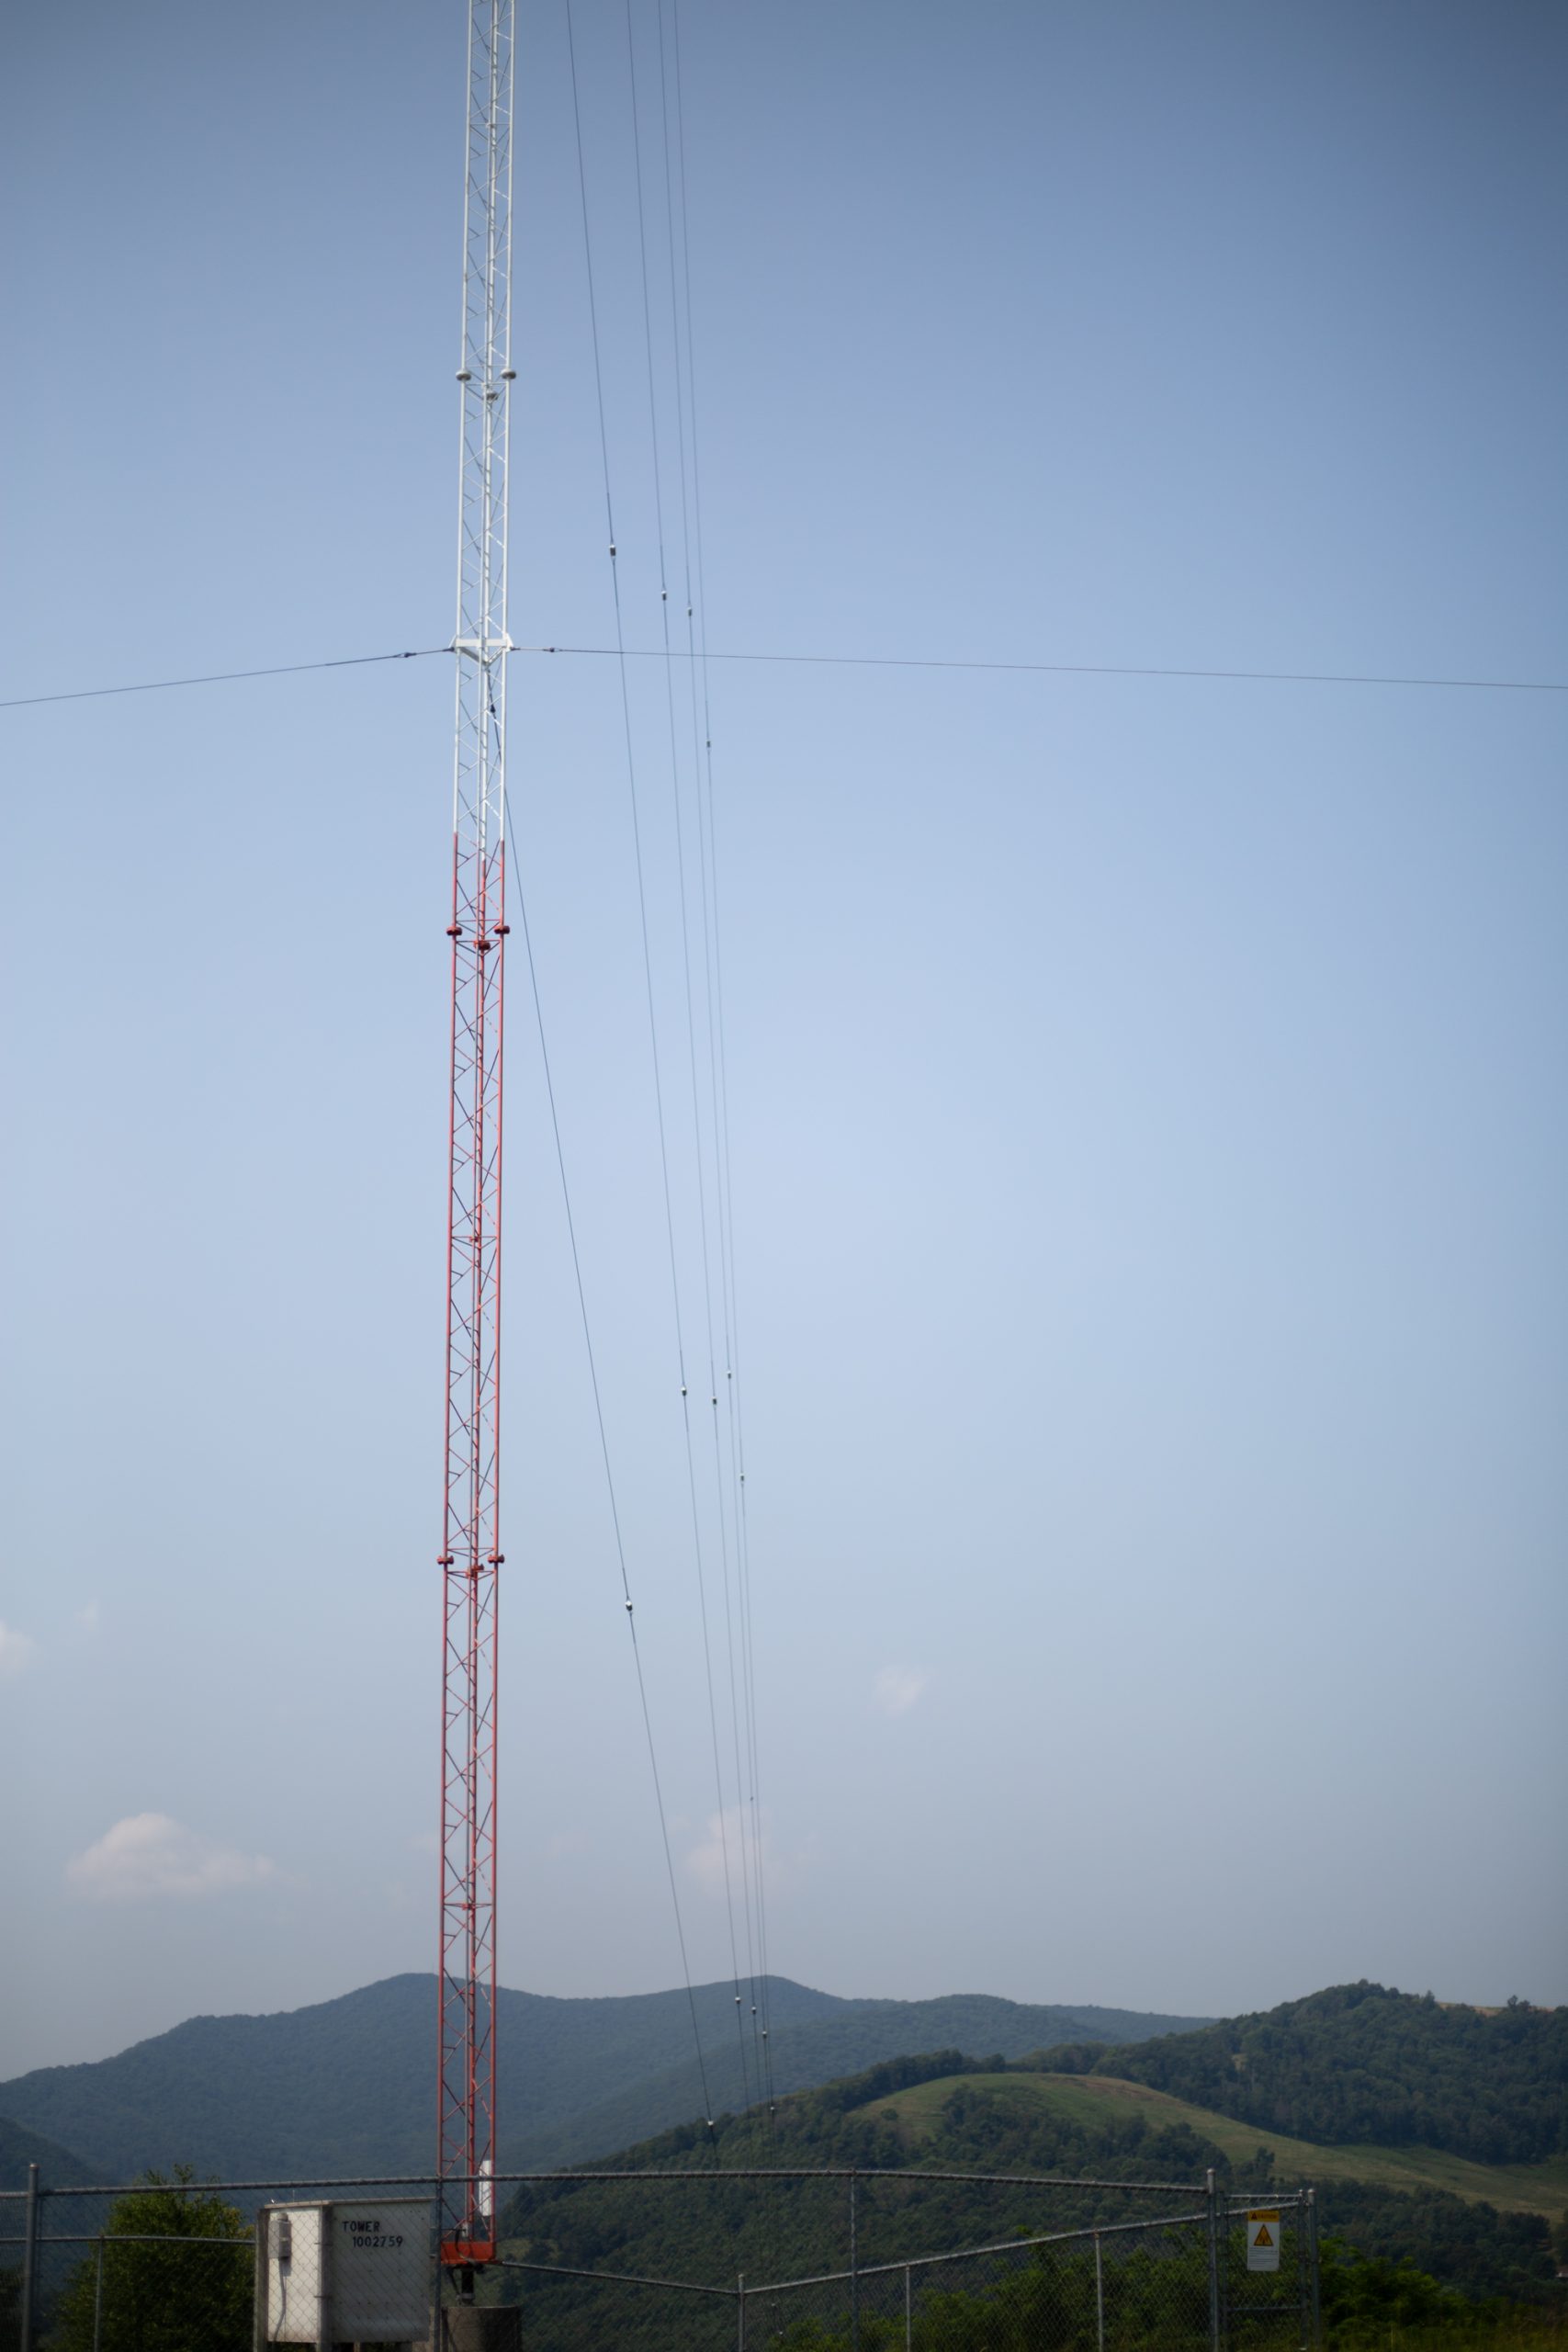 A red and white radio tower rises above mountains